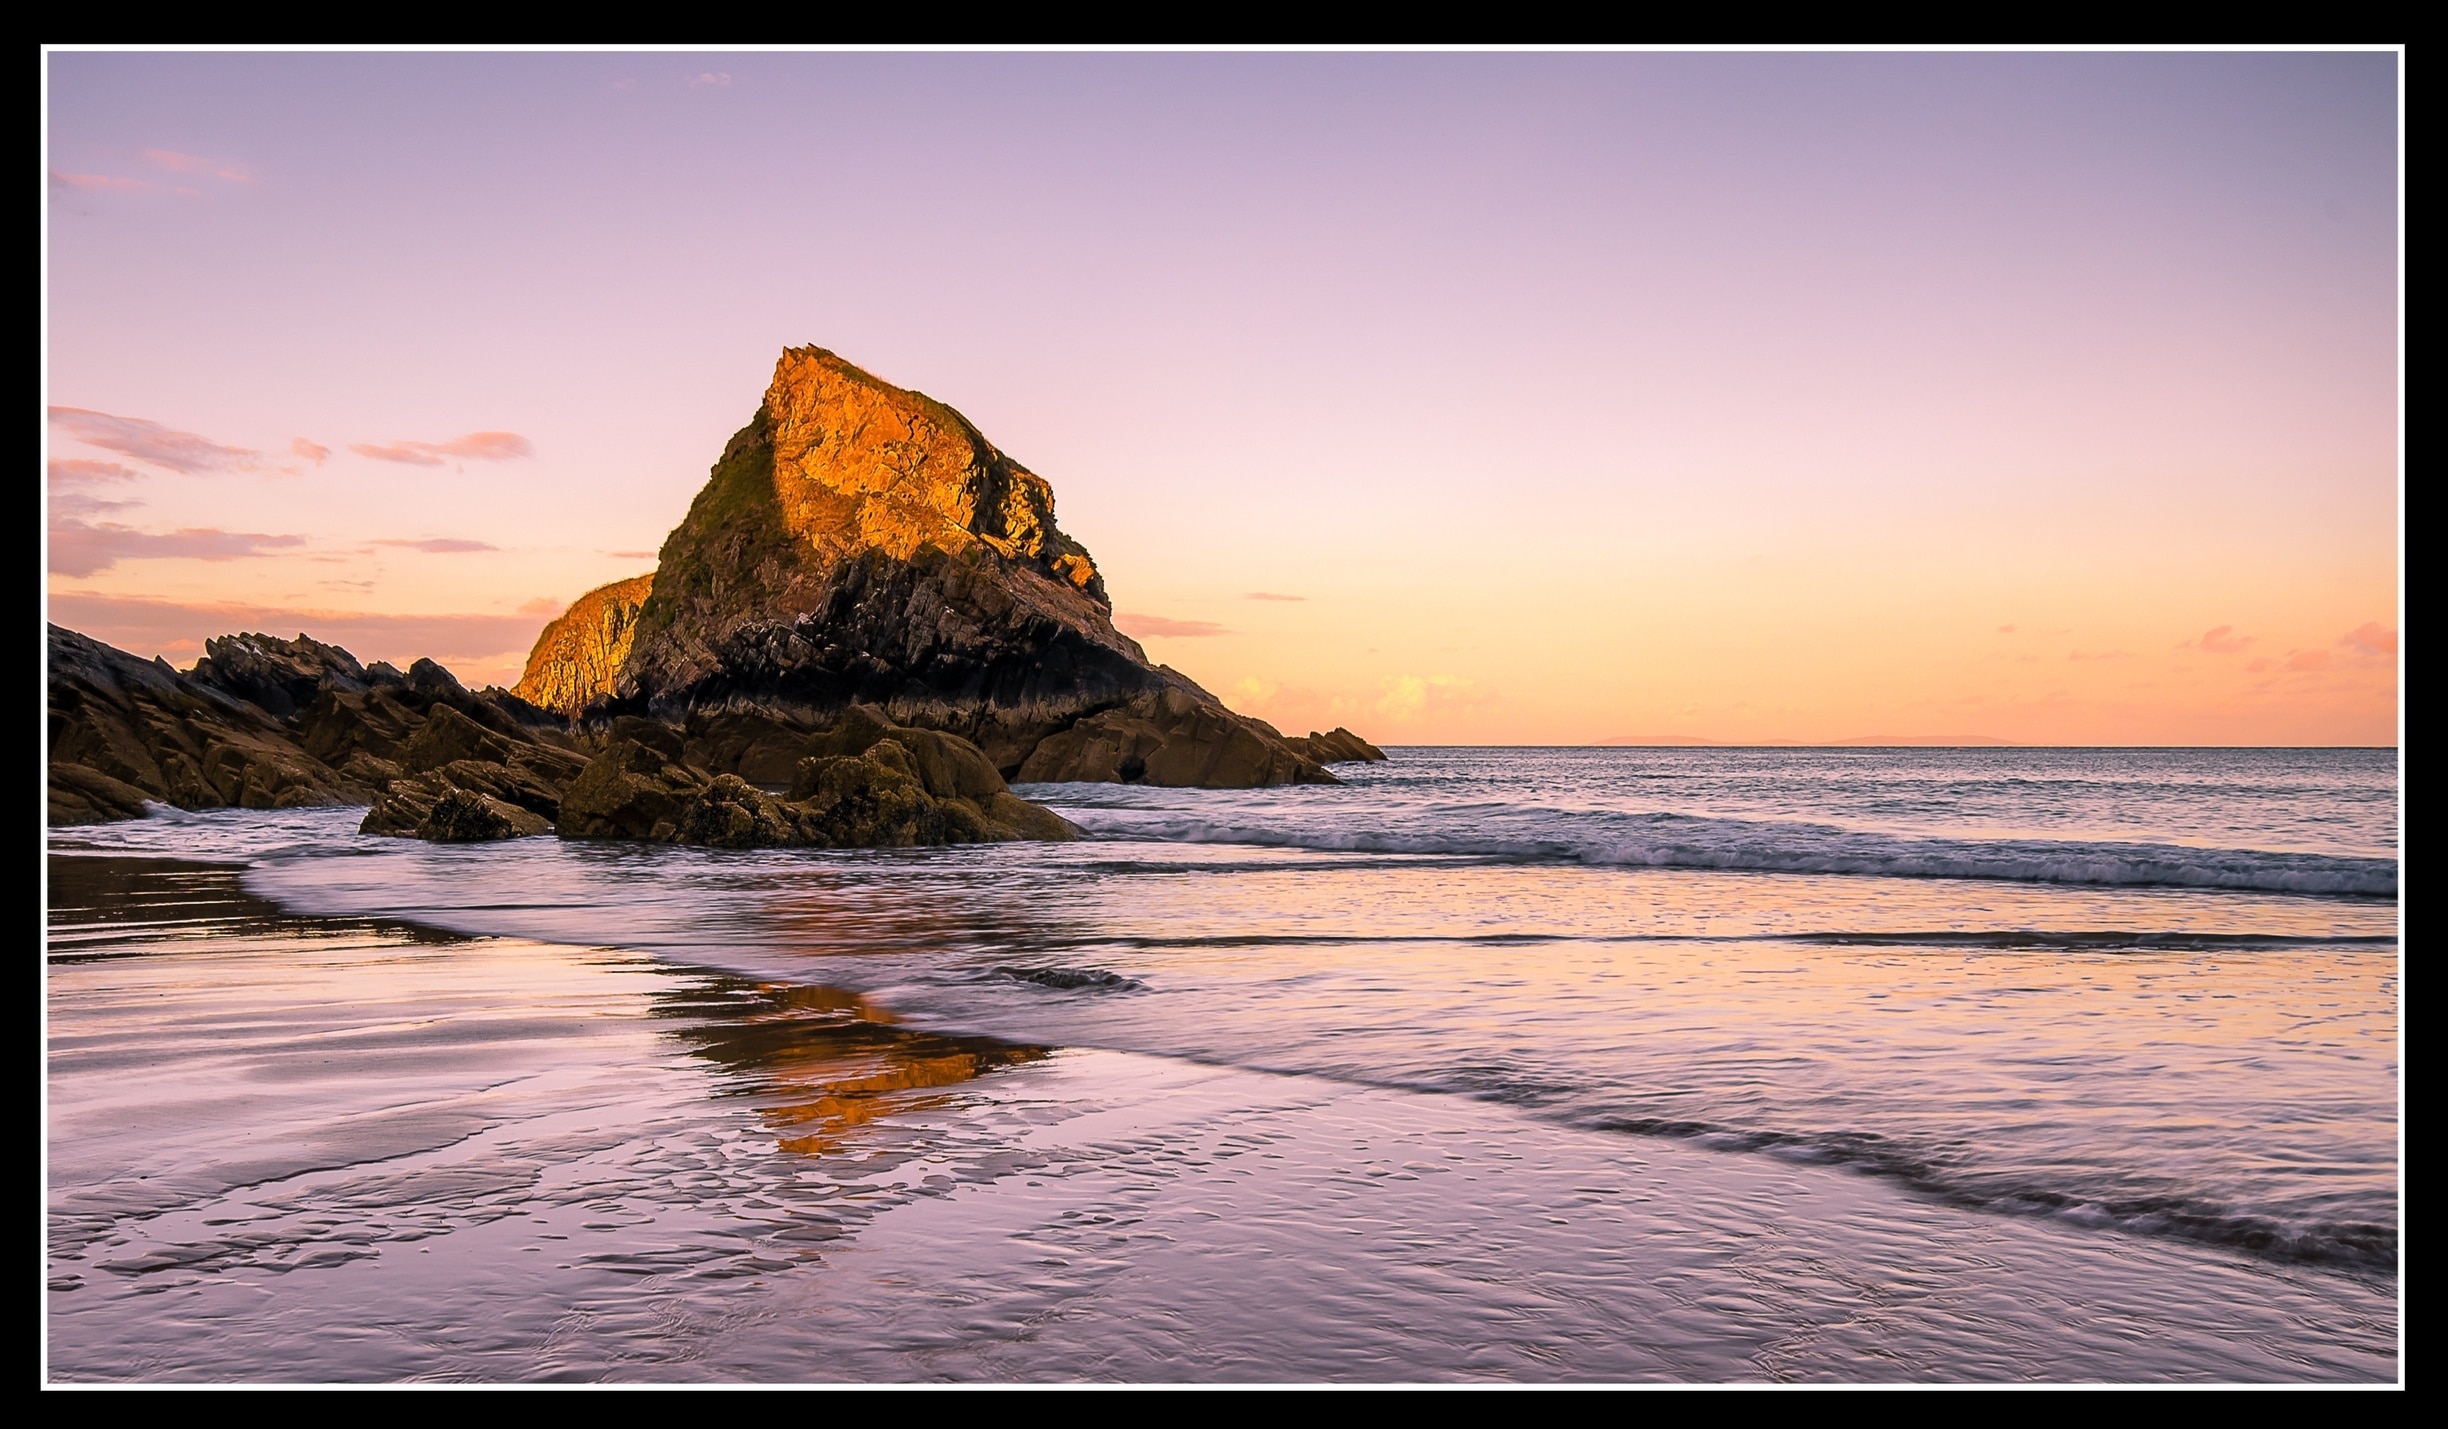 Sunset on monkstone beach, had to run across the beach with all my gear to take this as the light was fading fast 